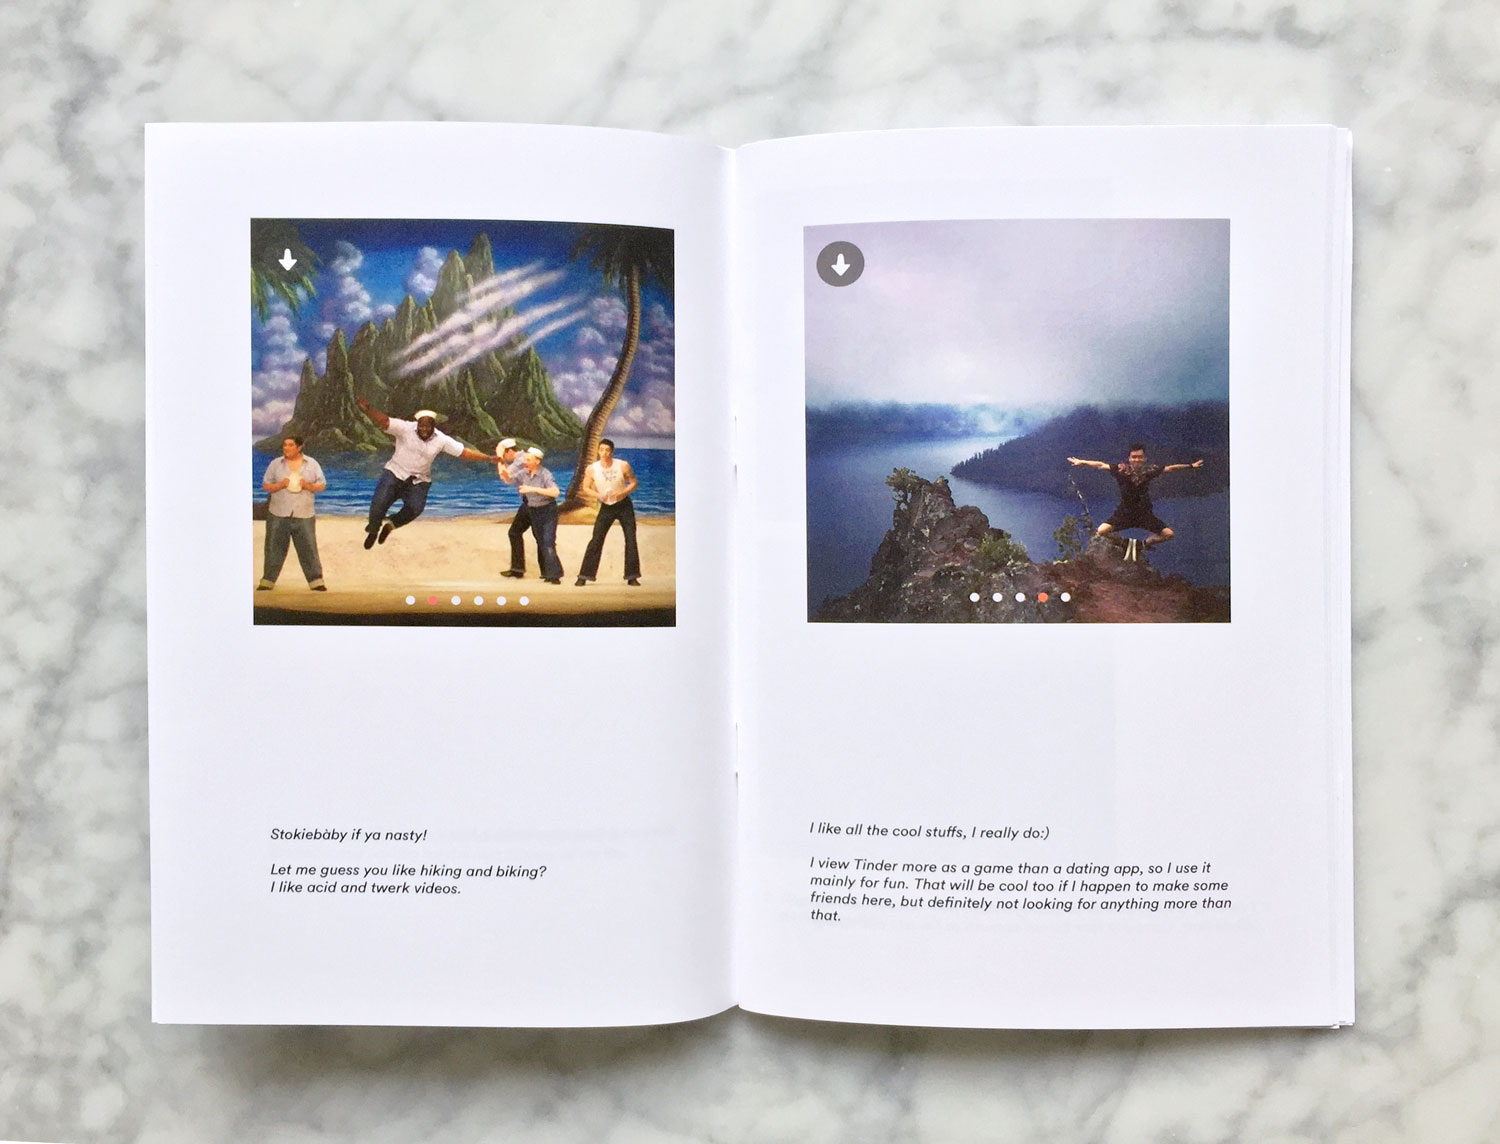 Interior spread featuring two Tinder profiles. On the left, a man jumps on the stage of a theater production; on the right, a man jumps in front of a nature landscape